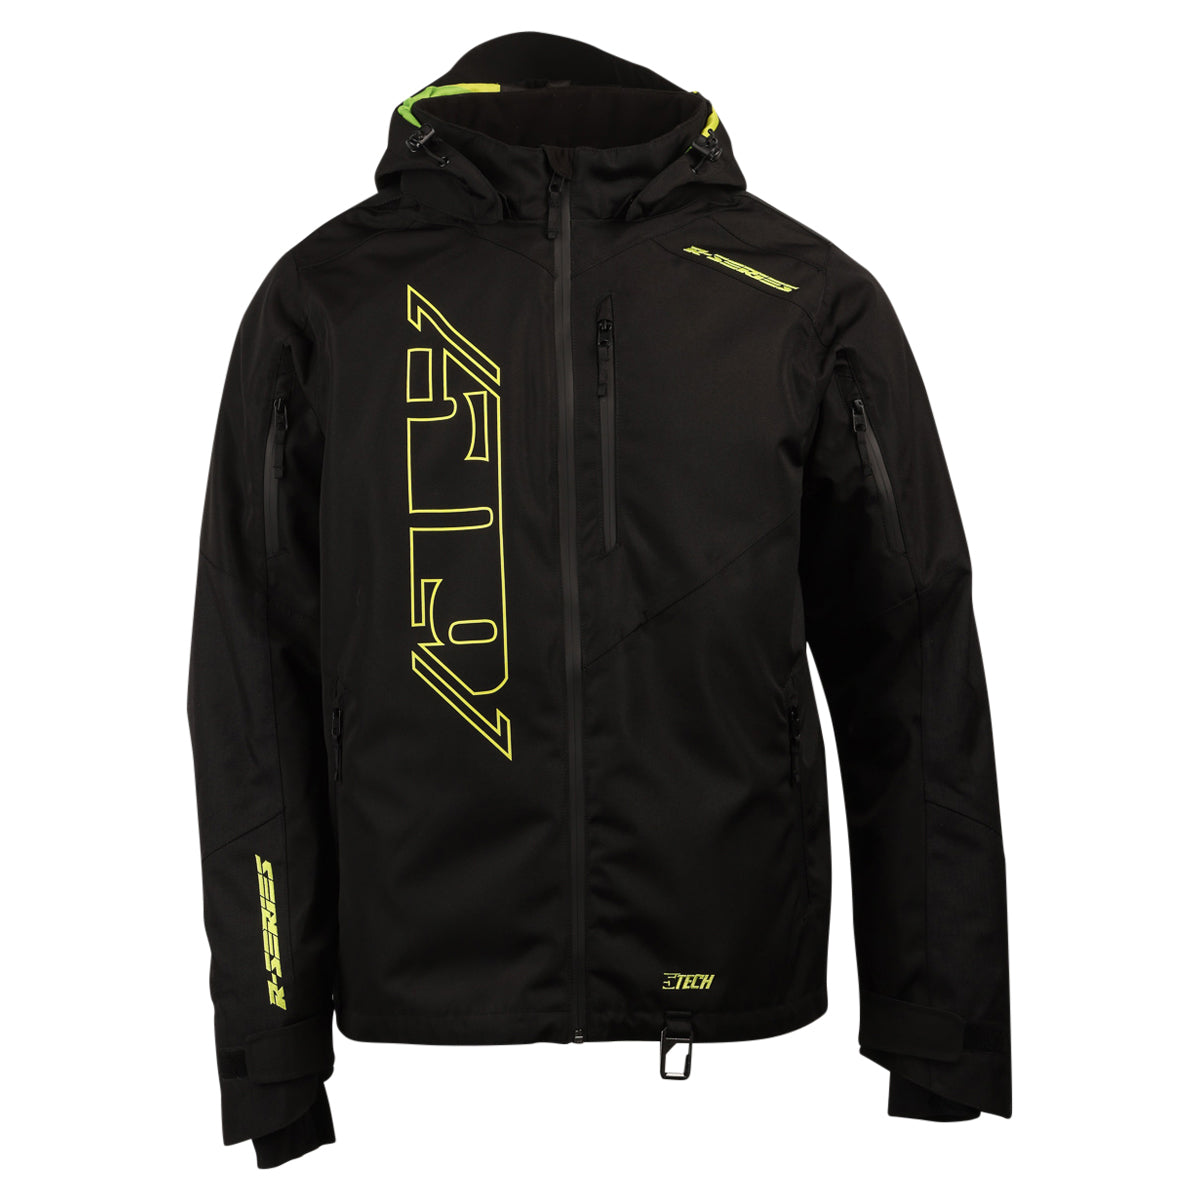 R-200 Insulated Jacket W23 Black Friday Limited Edition